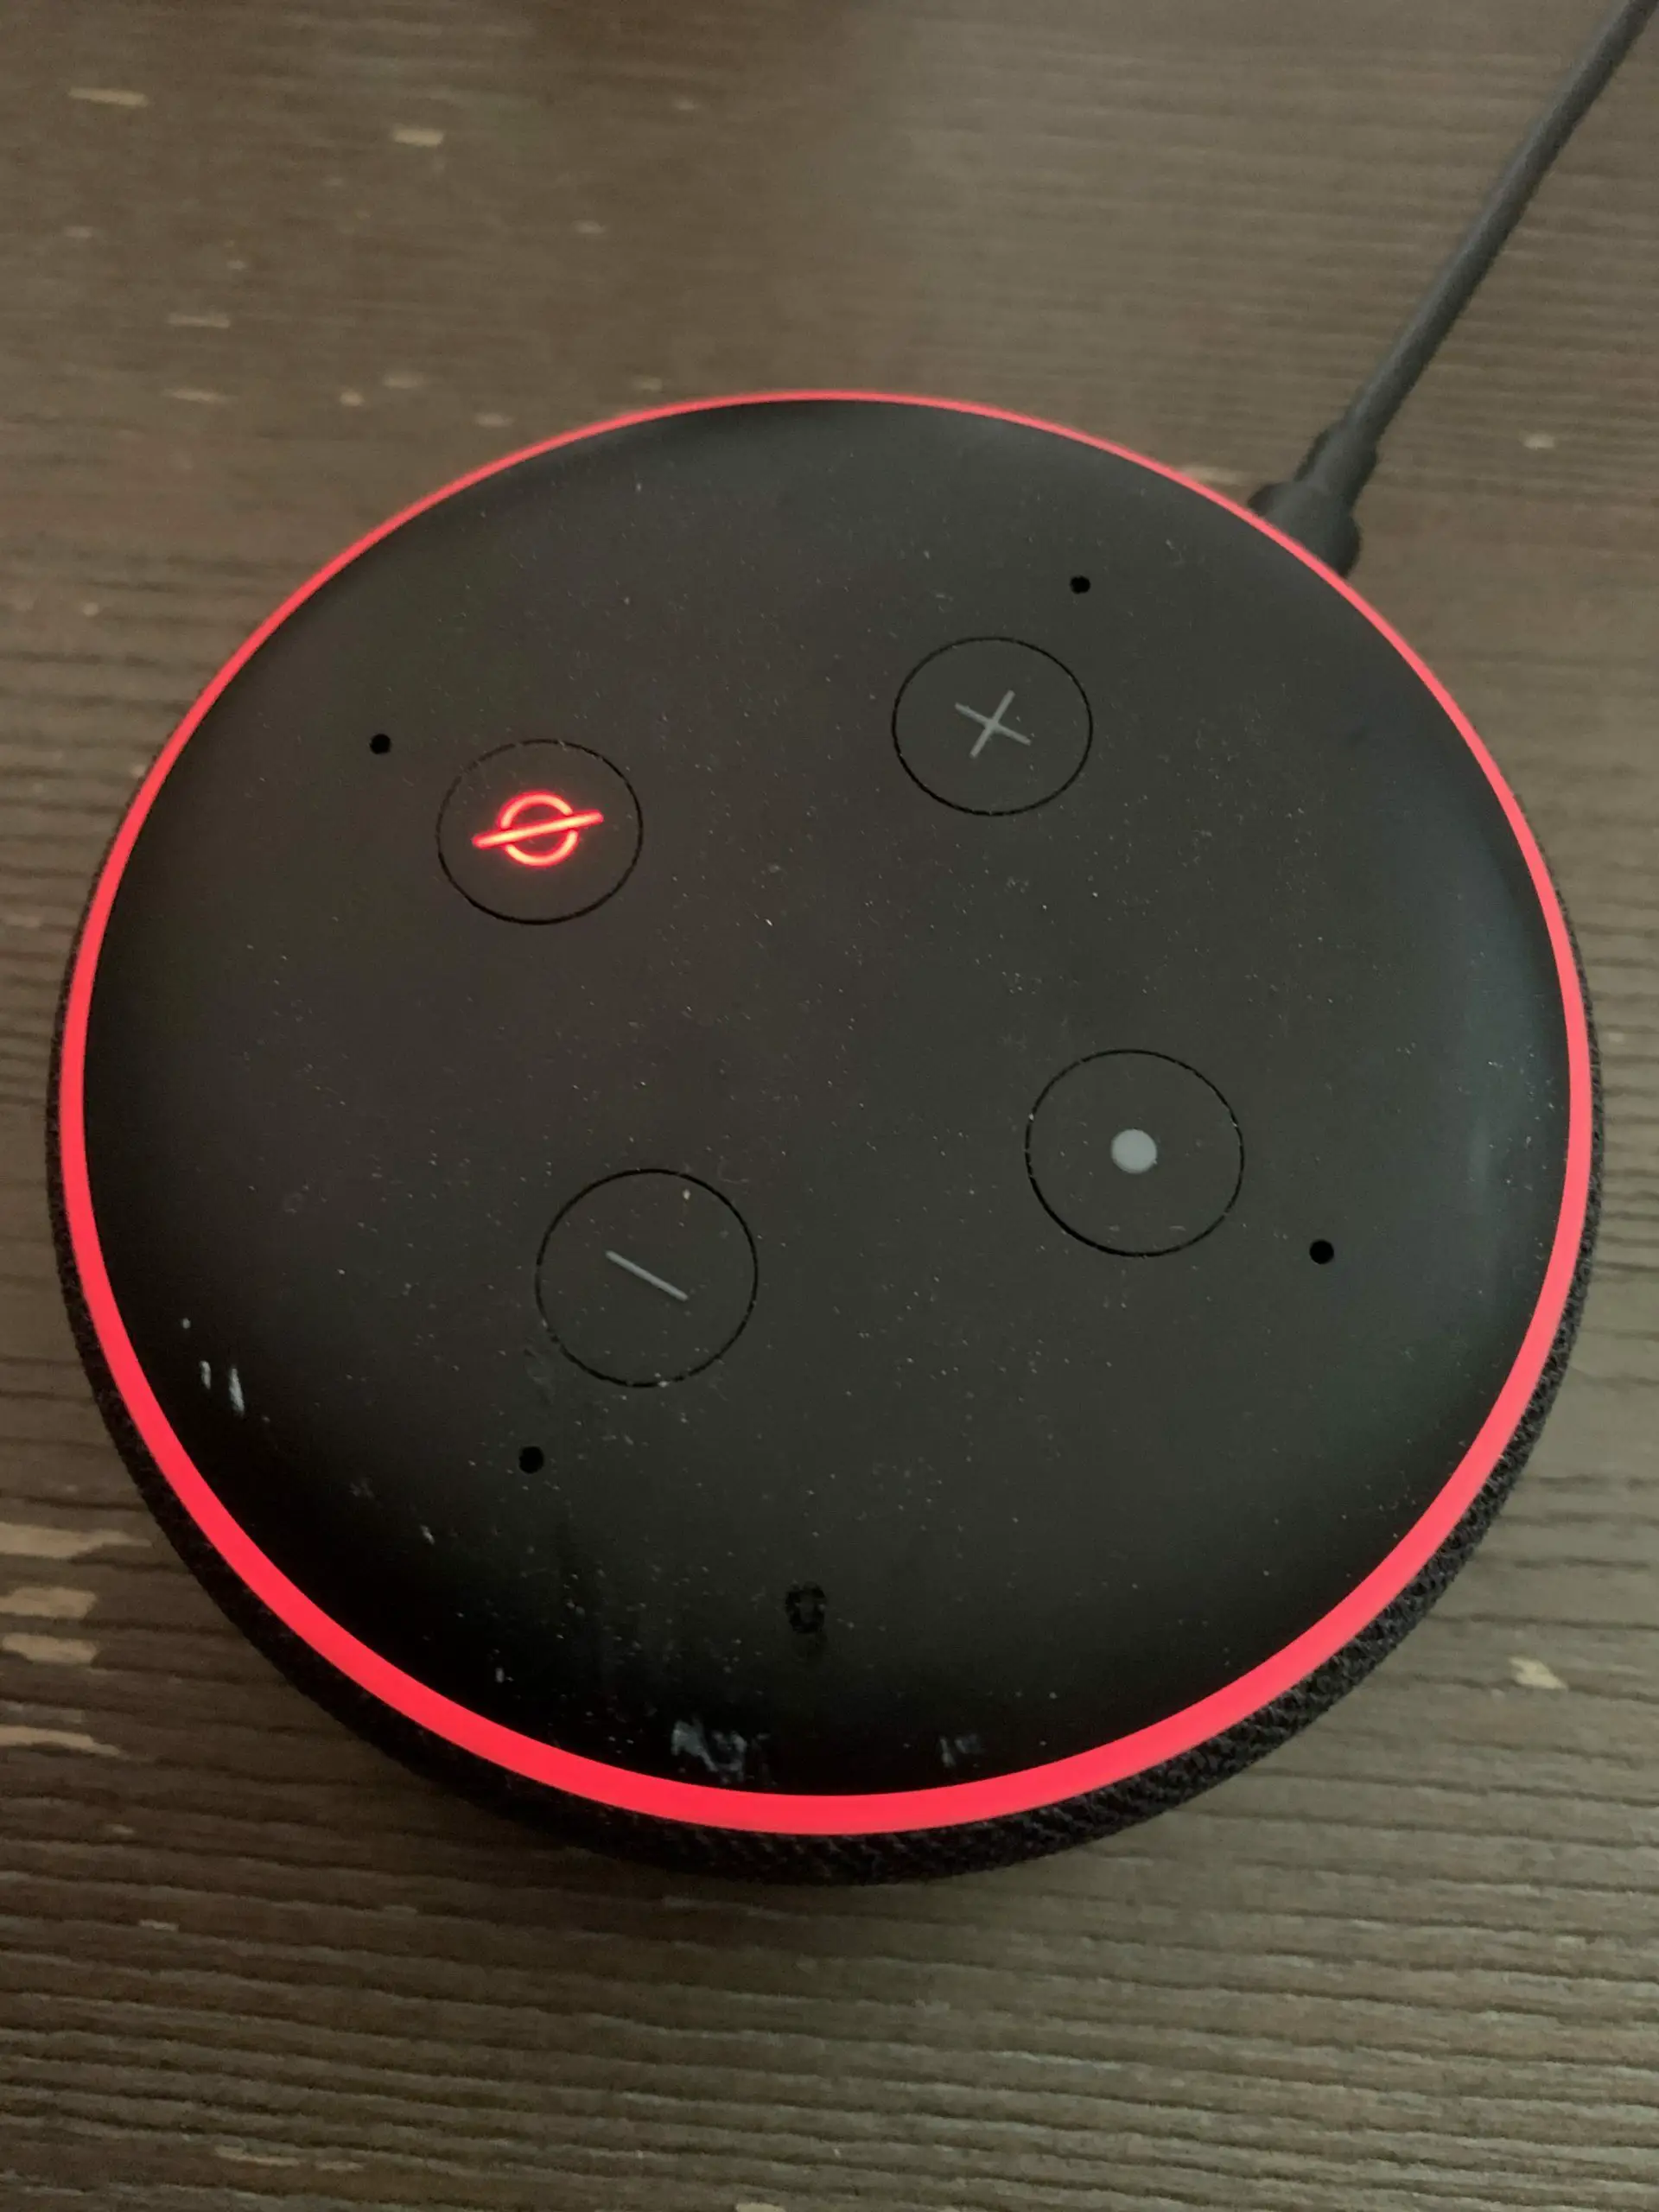 echo-dot-red-reason-1-scaled-7217654